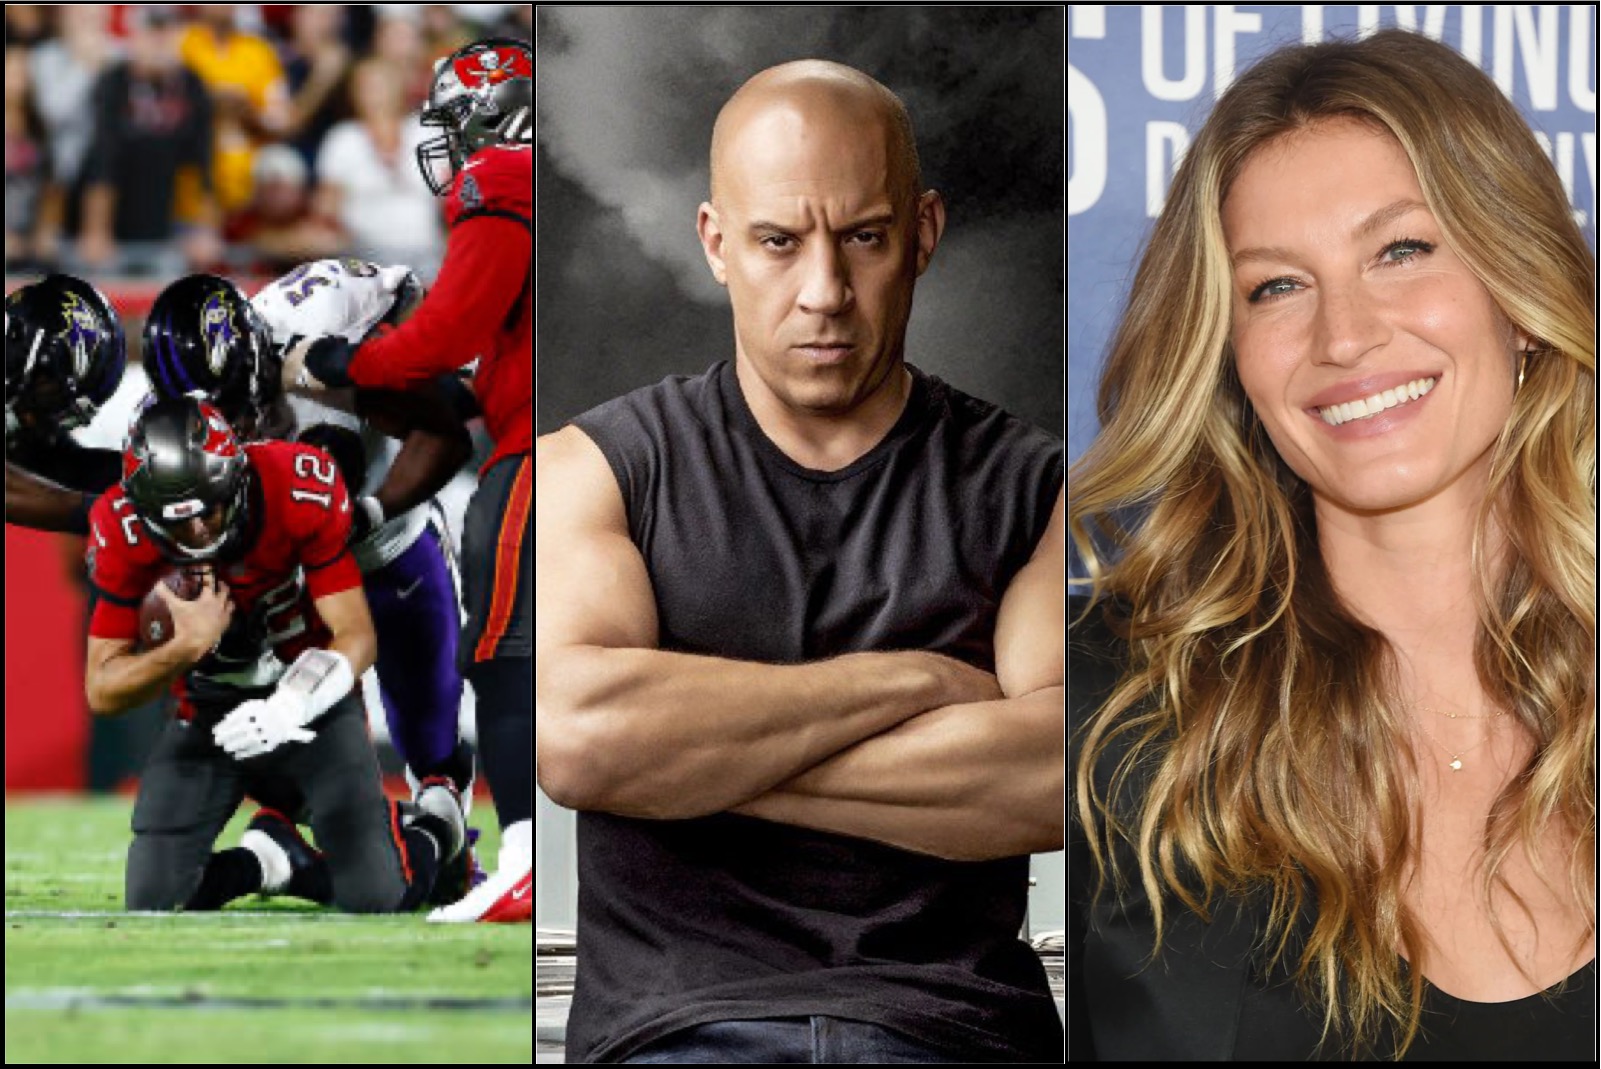 Social Media Reacts to Gisele Bündchen Filing For Divorce After Tom Brady Loss to Ravens